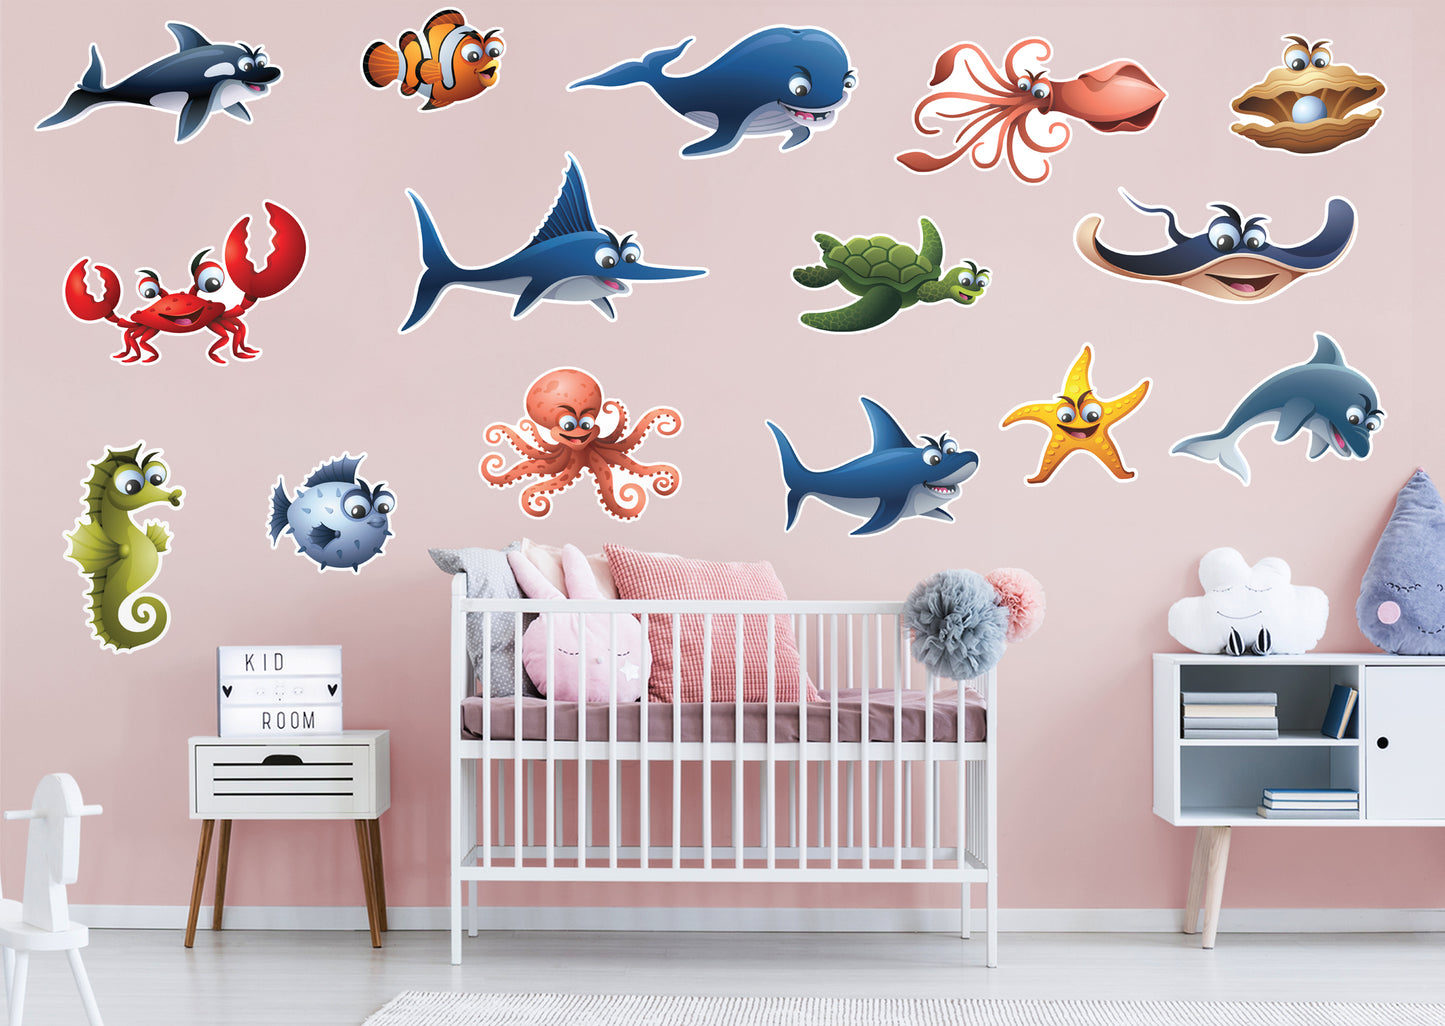 Nursery:  Aquatic Creatures Part 2 Collection        -   Removable Wall   Adhesive Decal